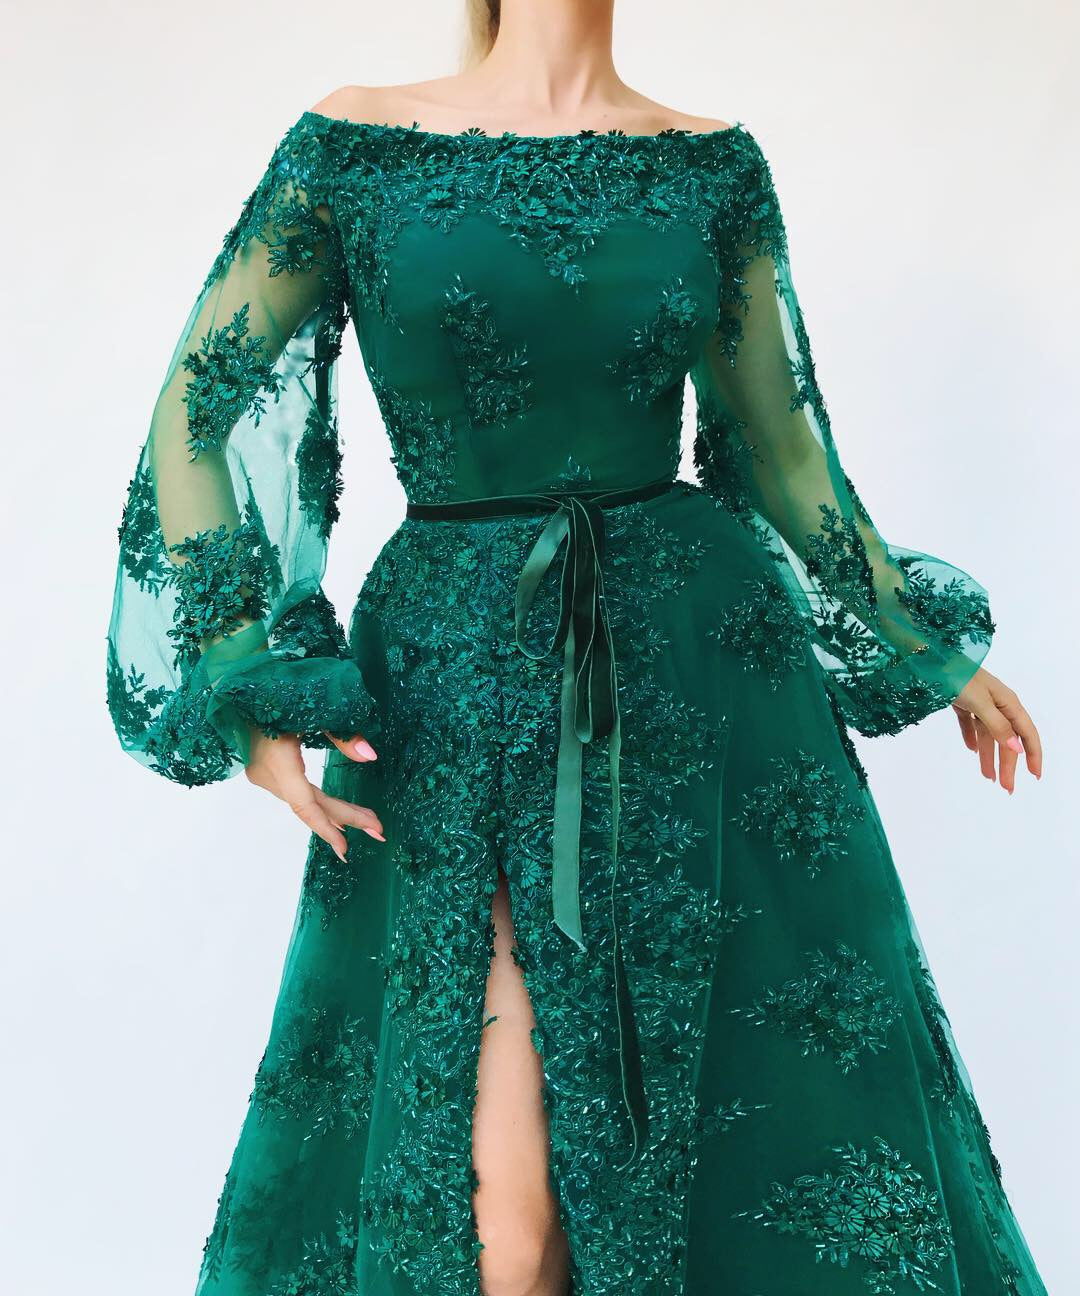 Green A-Line dress with embroidery and long off the shoulder sleeves